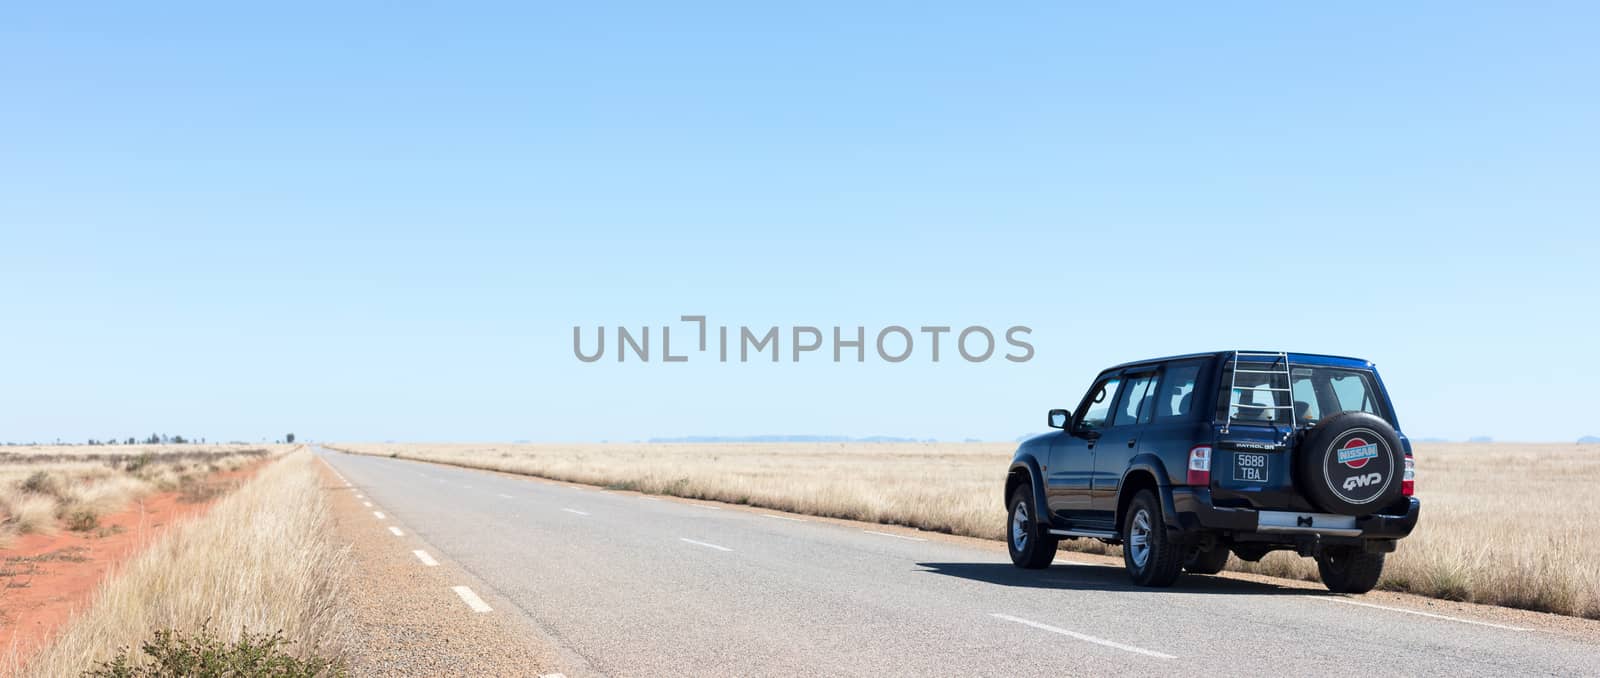 Madagascar on july 30, 2019 - A black car on a deserted road on  by michaklootwijk